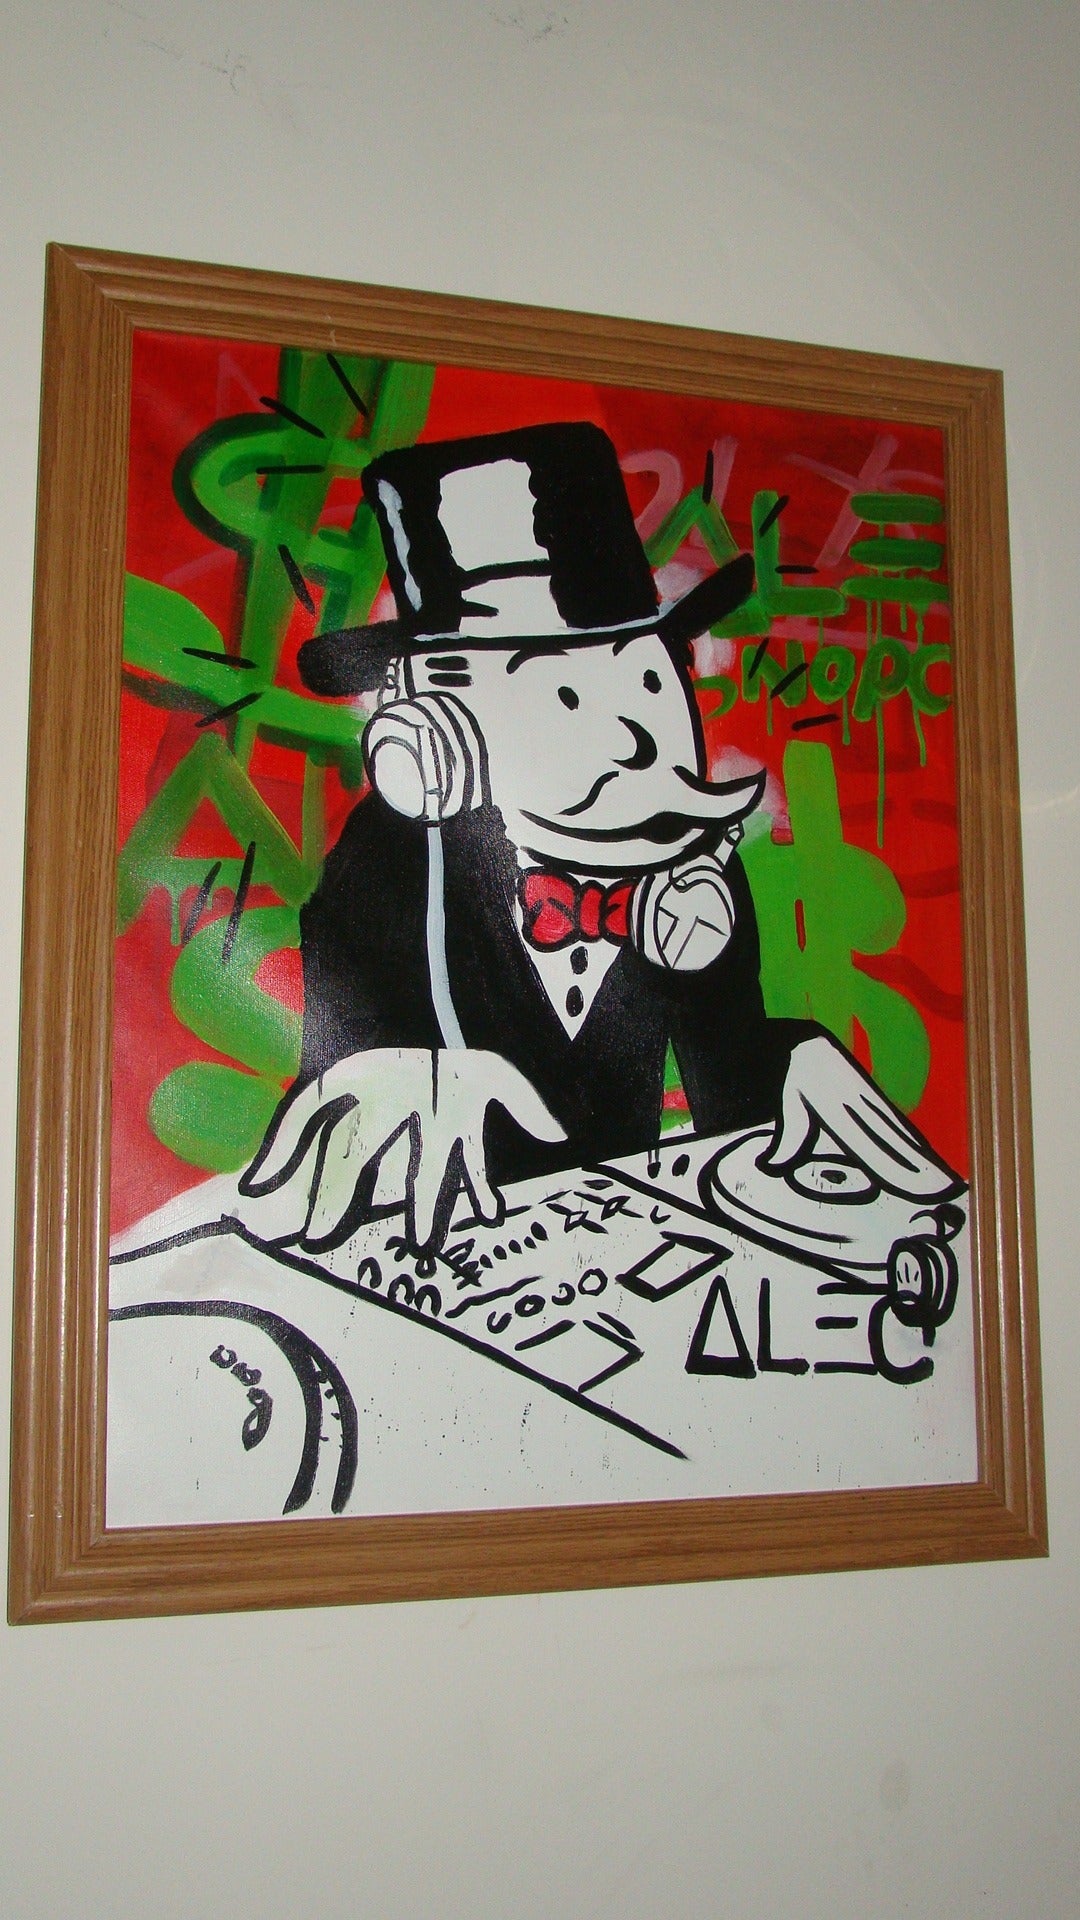 Exceptional Original Alec Monopoly Painting. This interesting painting depicts a DJ Monopoly Man. Signed Alec on the front and back and dated 2014. Truly a beautiful piece in person.